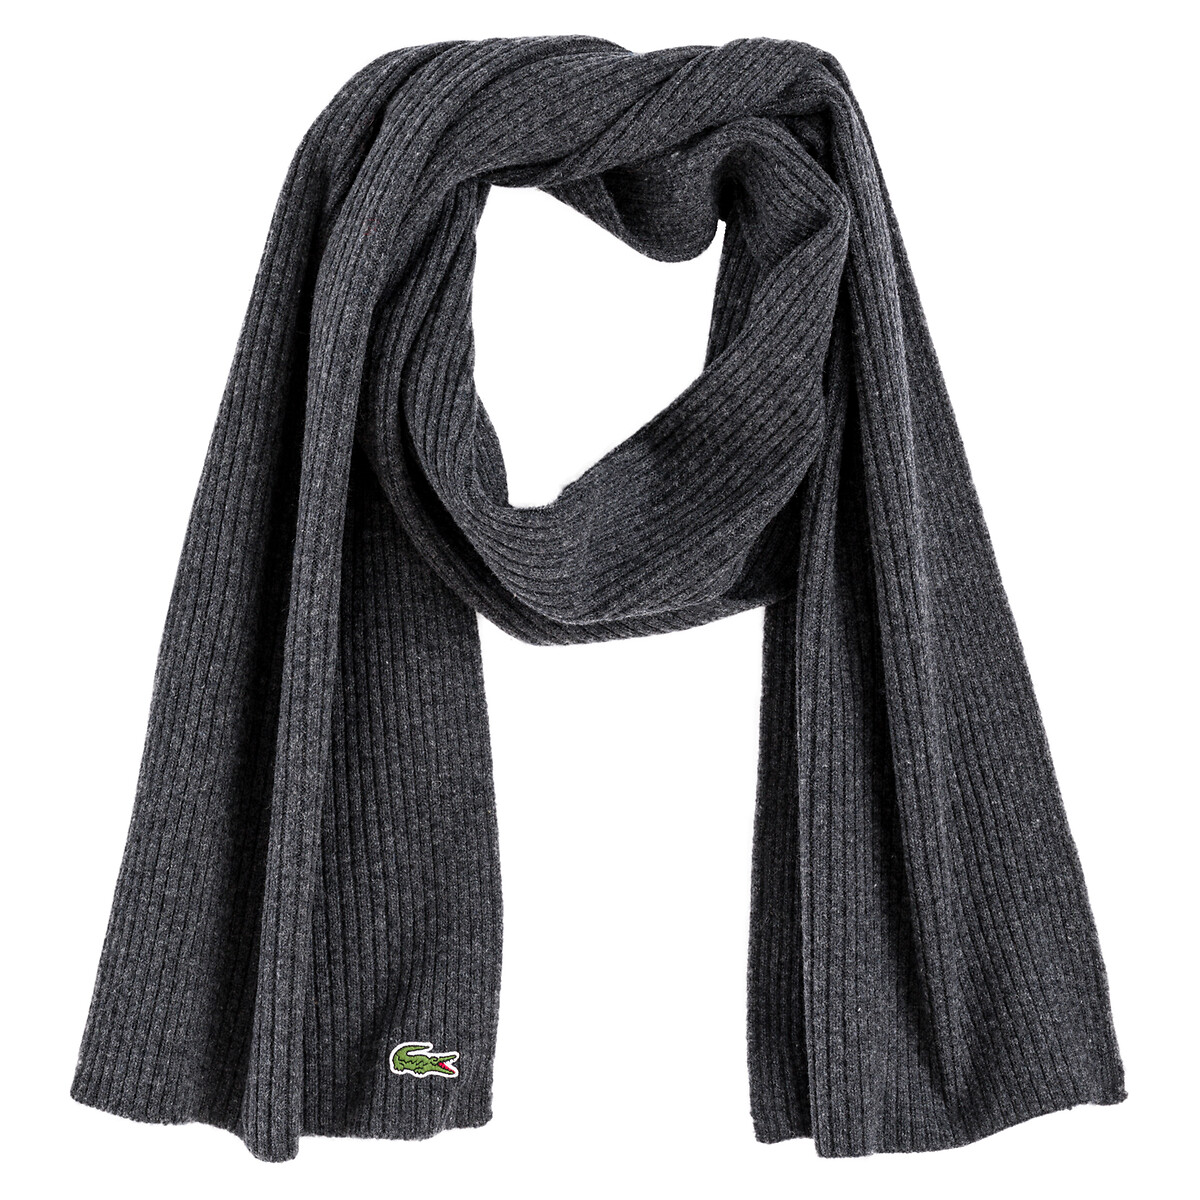 Lacoste CottonCashmere Ribbed Striped Scarf 205x25 cm